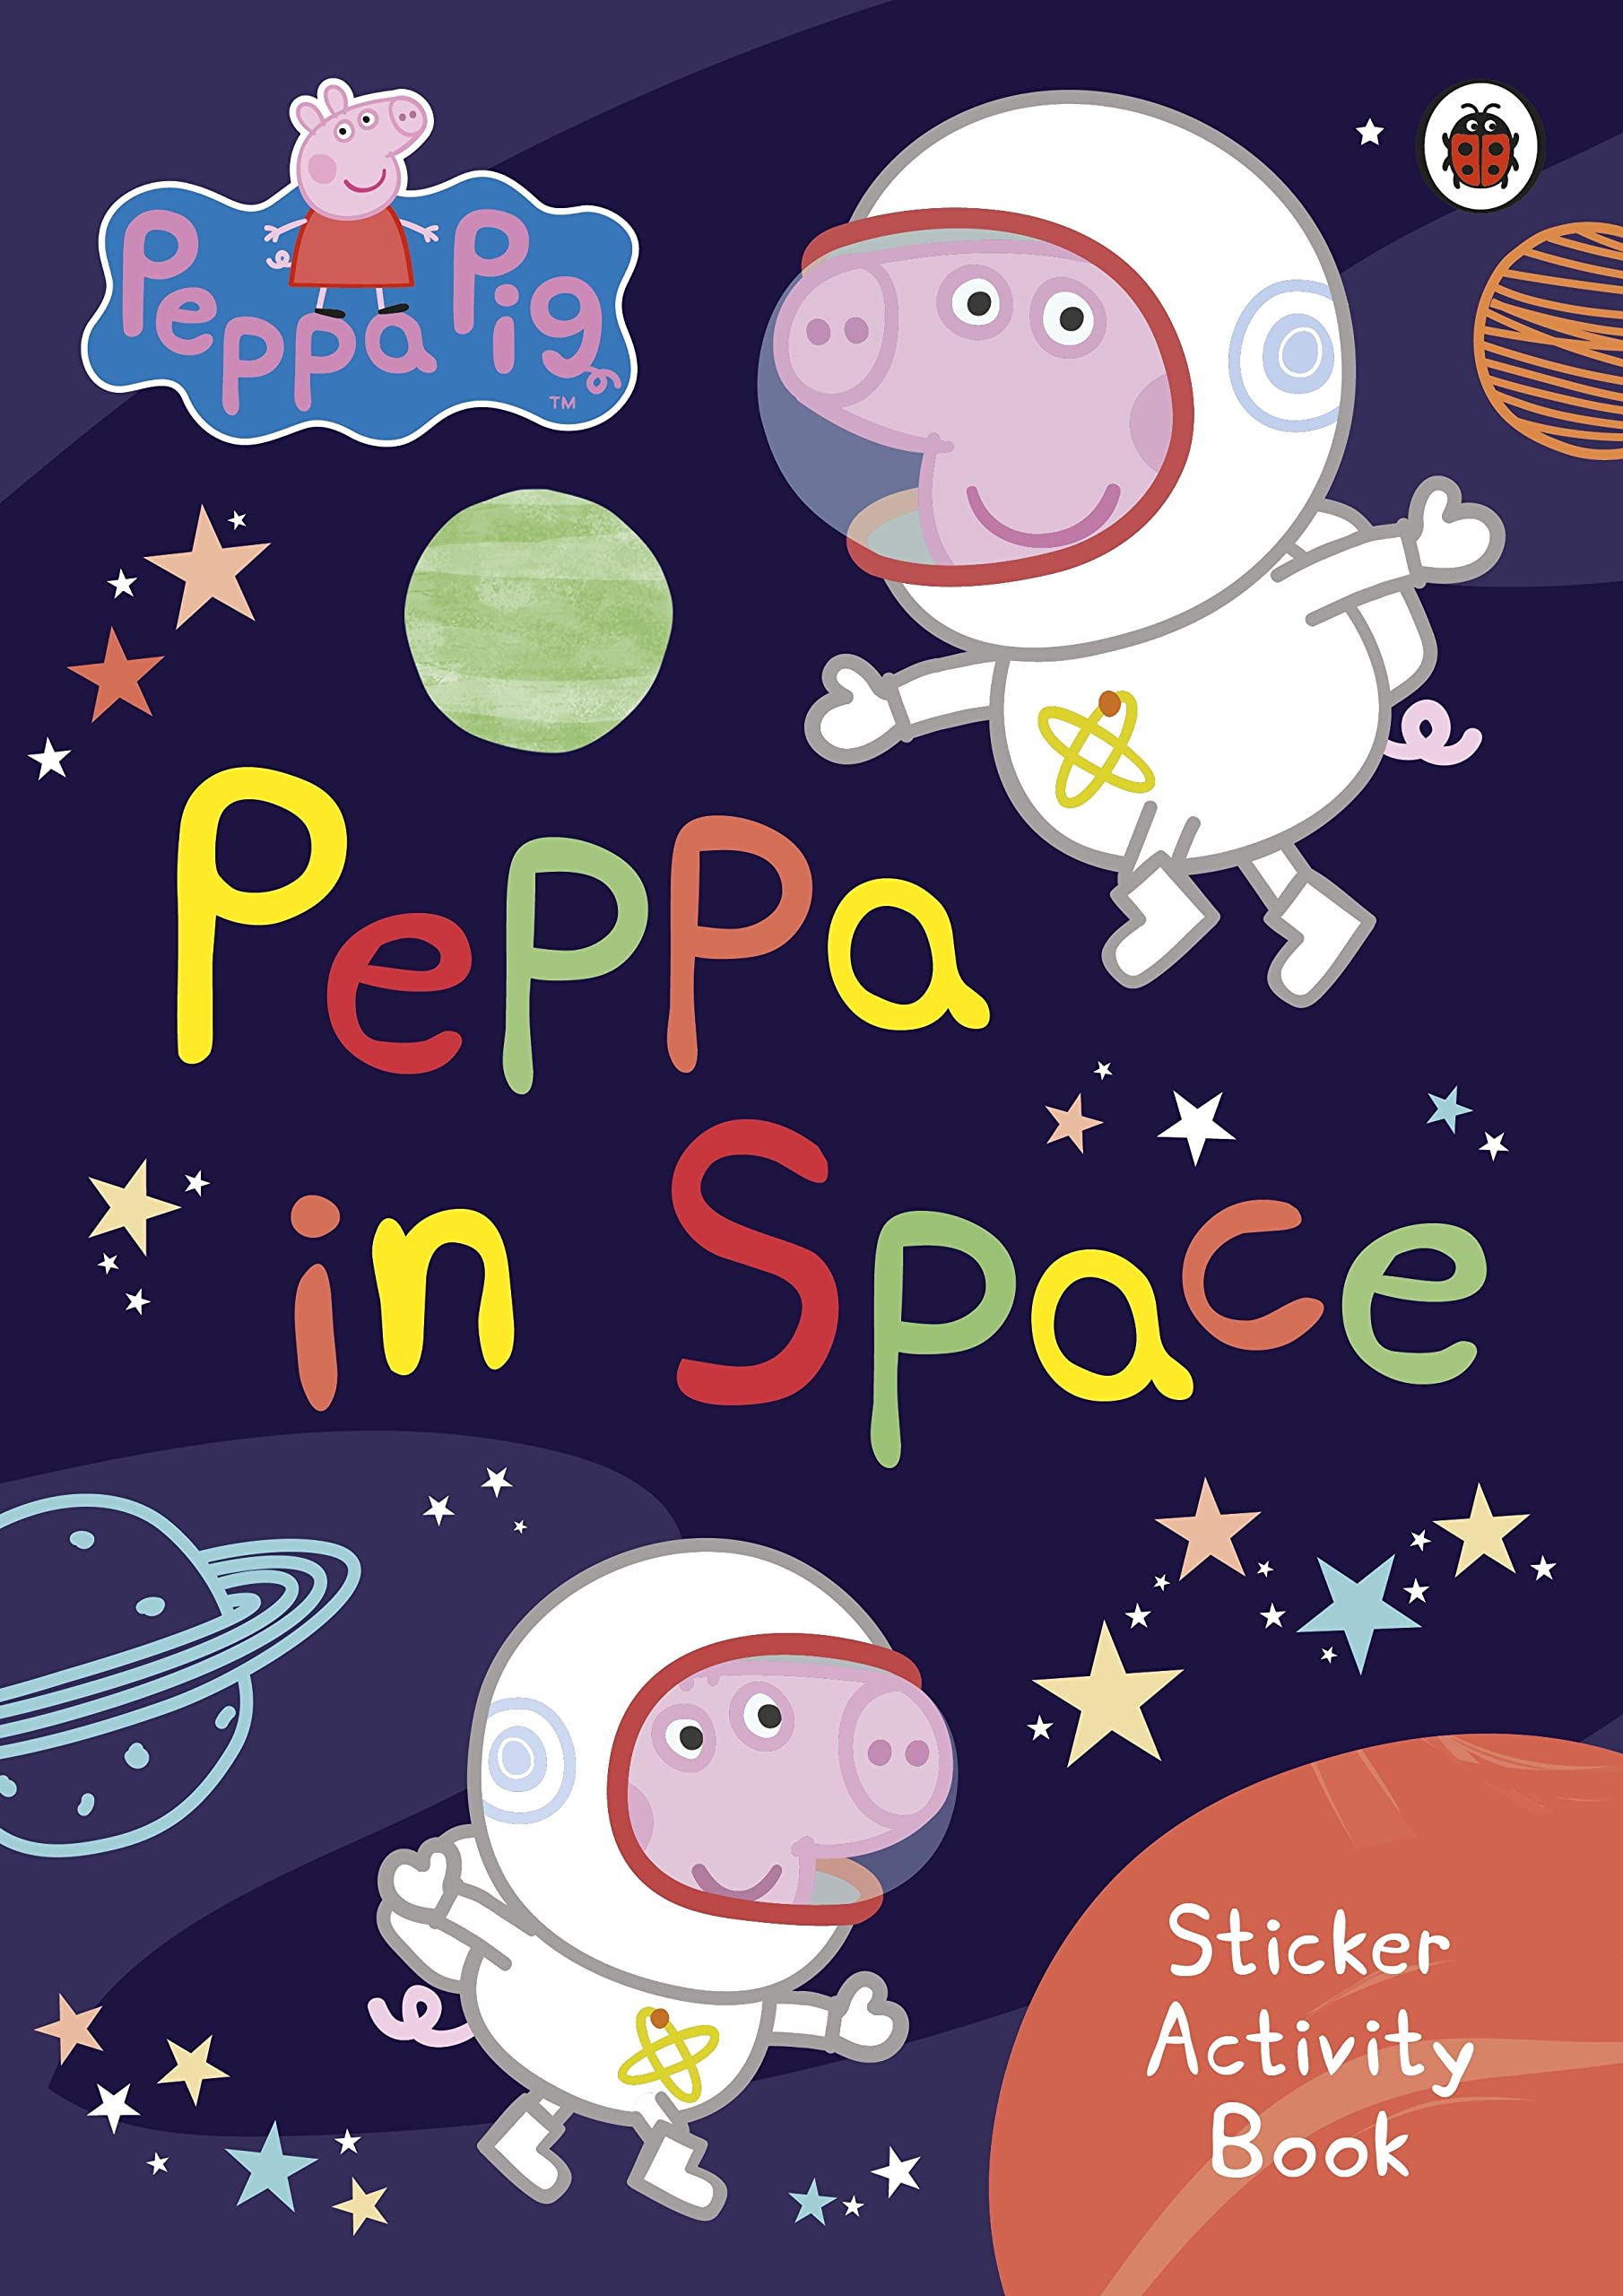 Peppa in Space Sticker Activity Book |  image19